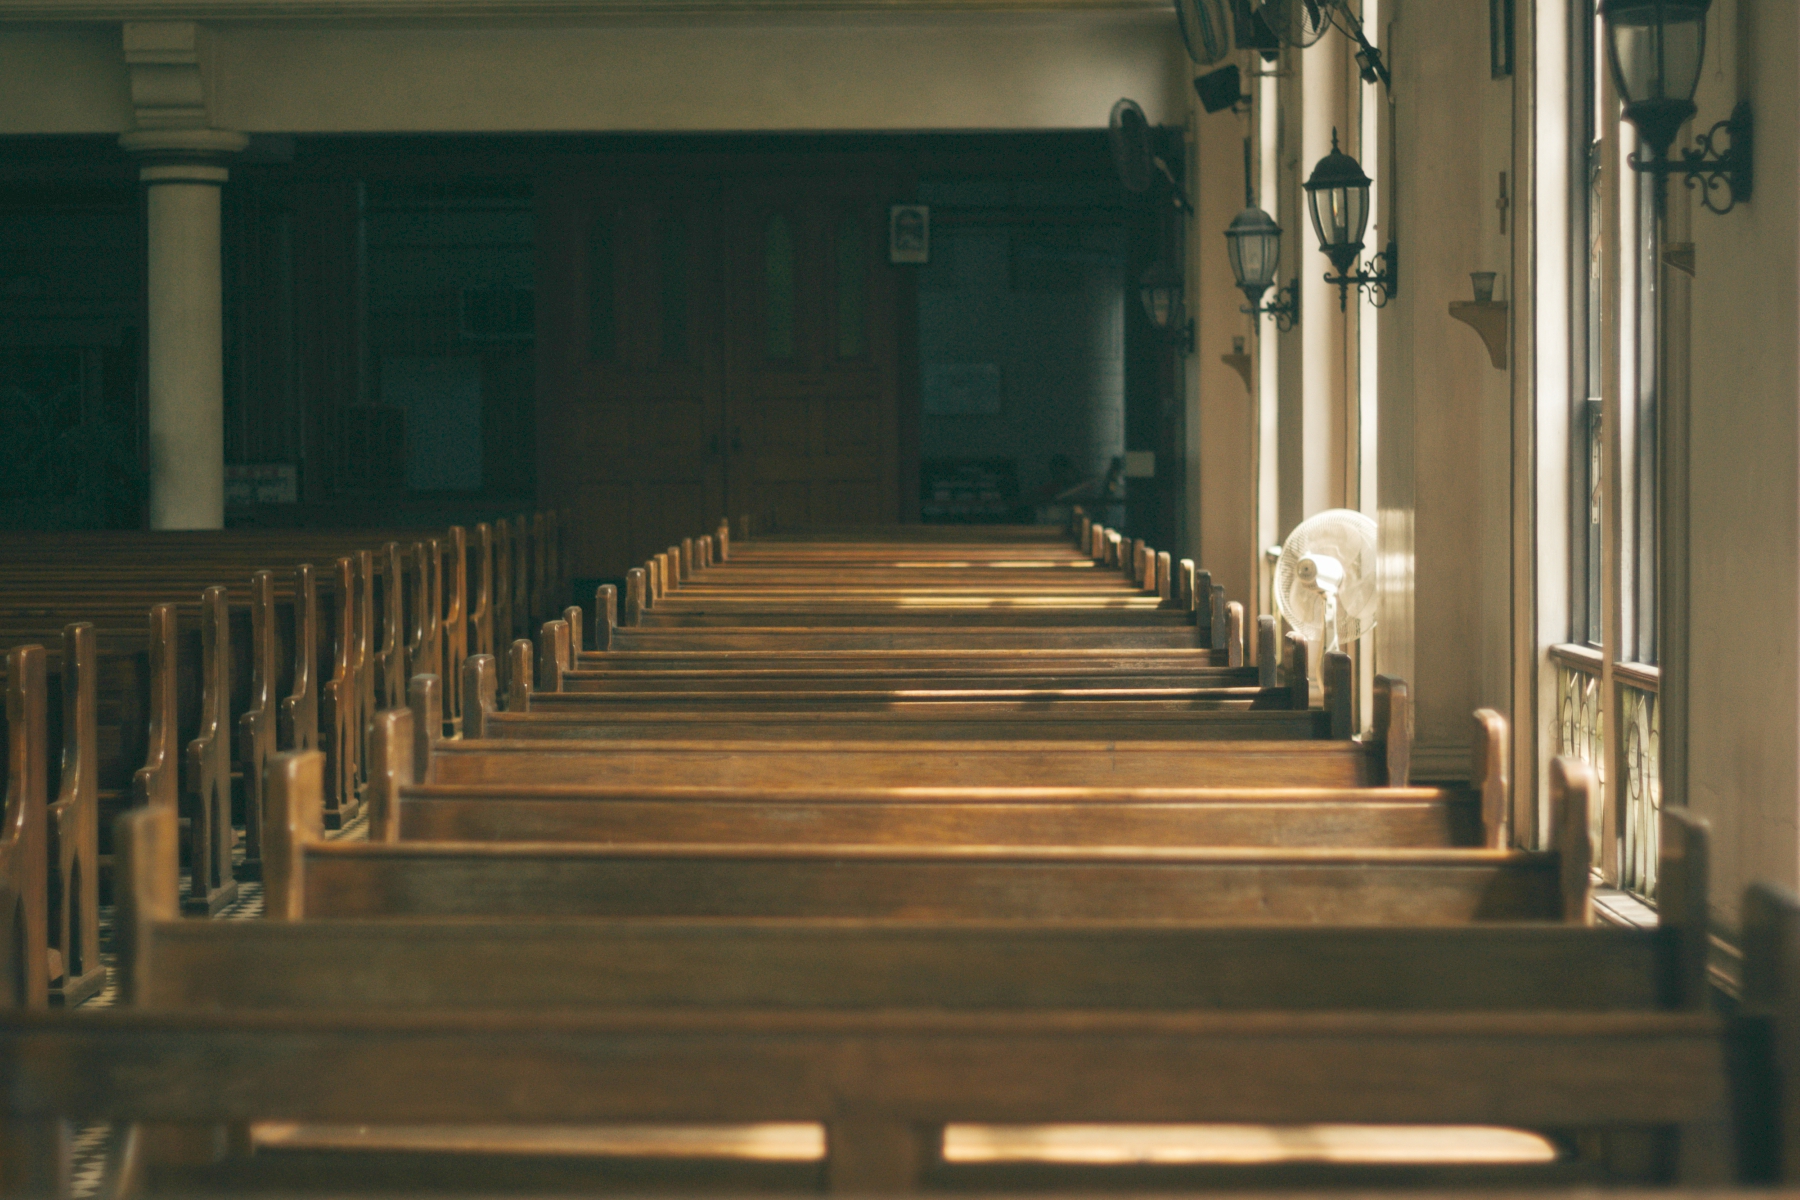 Robert L. Rodenbush – Hospice Care For Dying Churches?